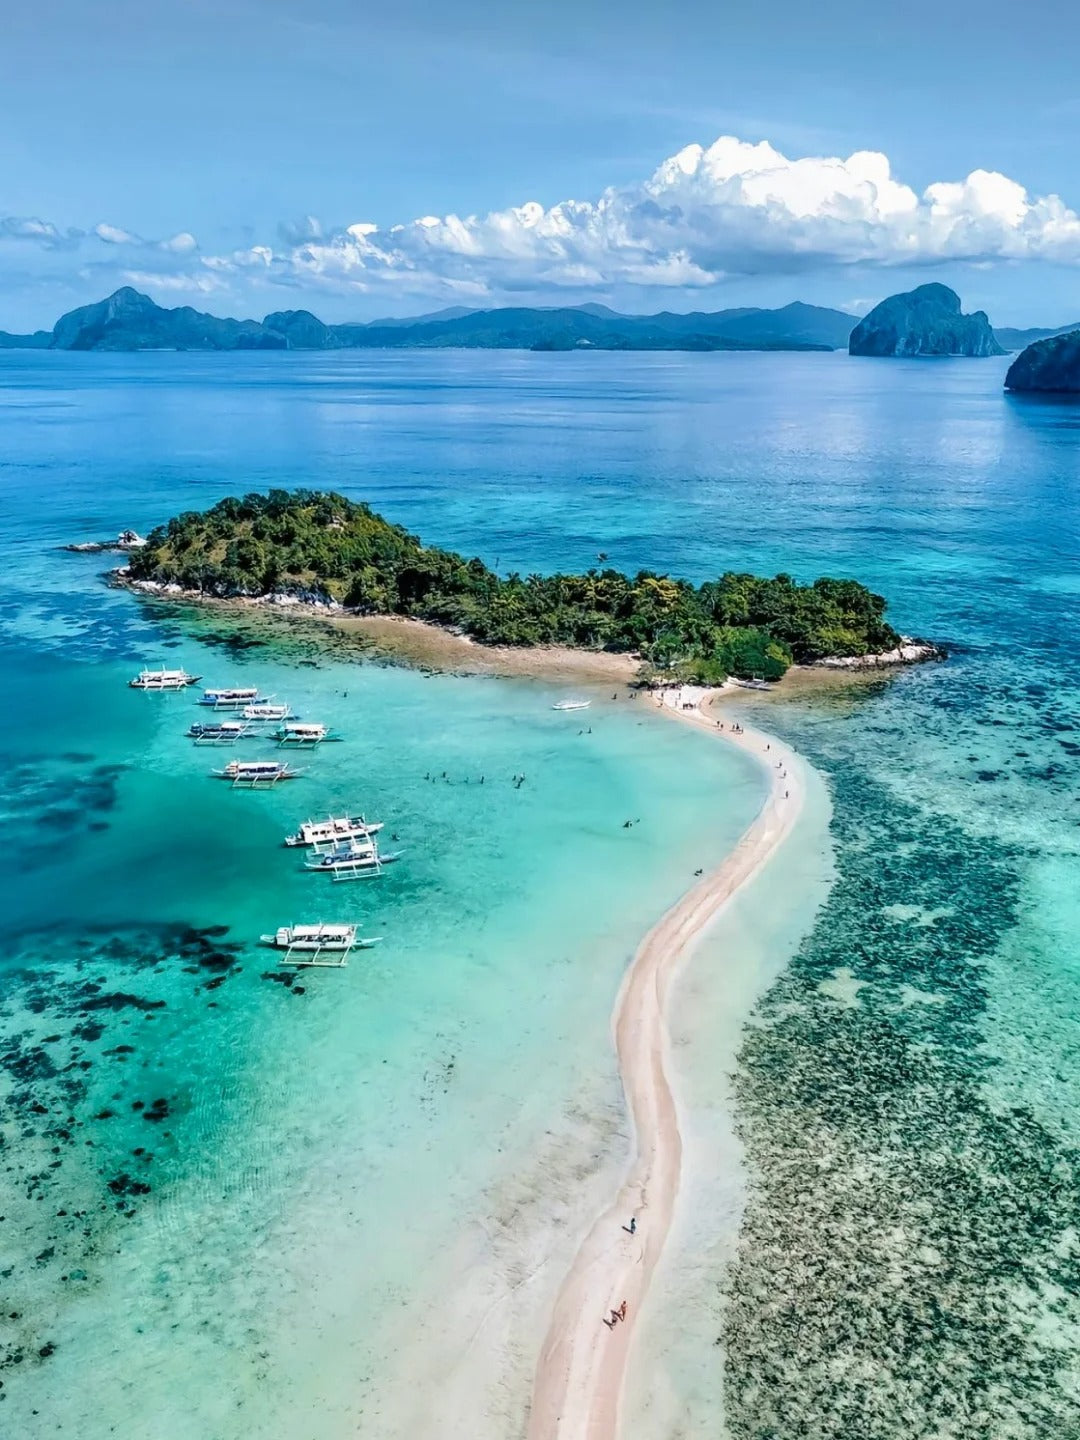 The Philippines: A Vacation Paradise of Countless Islands